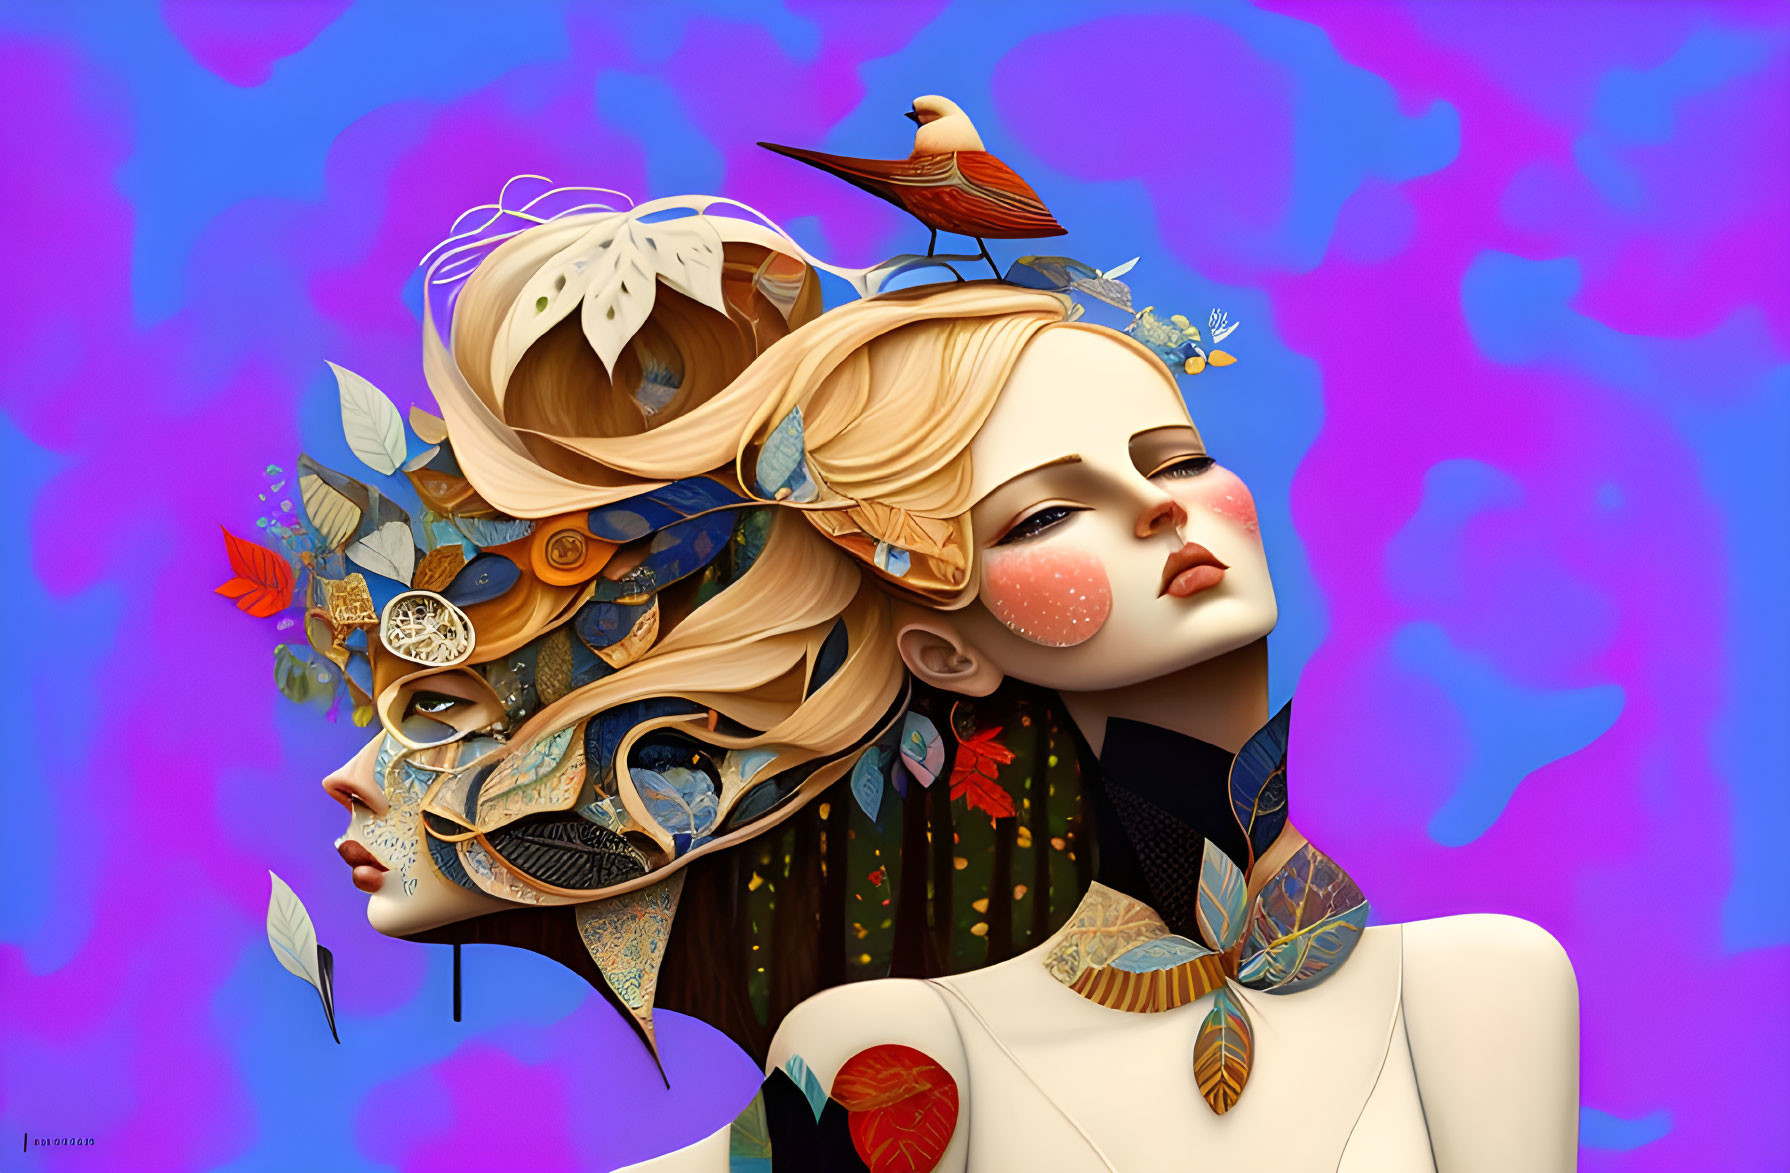 Stylized female portraits with ornate hair and nature accessories on pink and blue backdrop